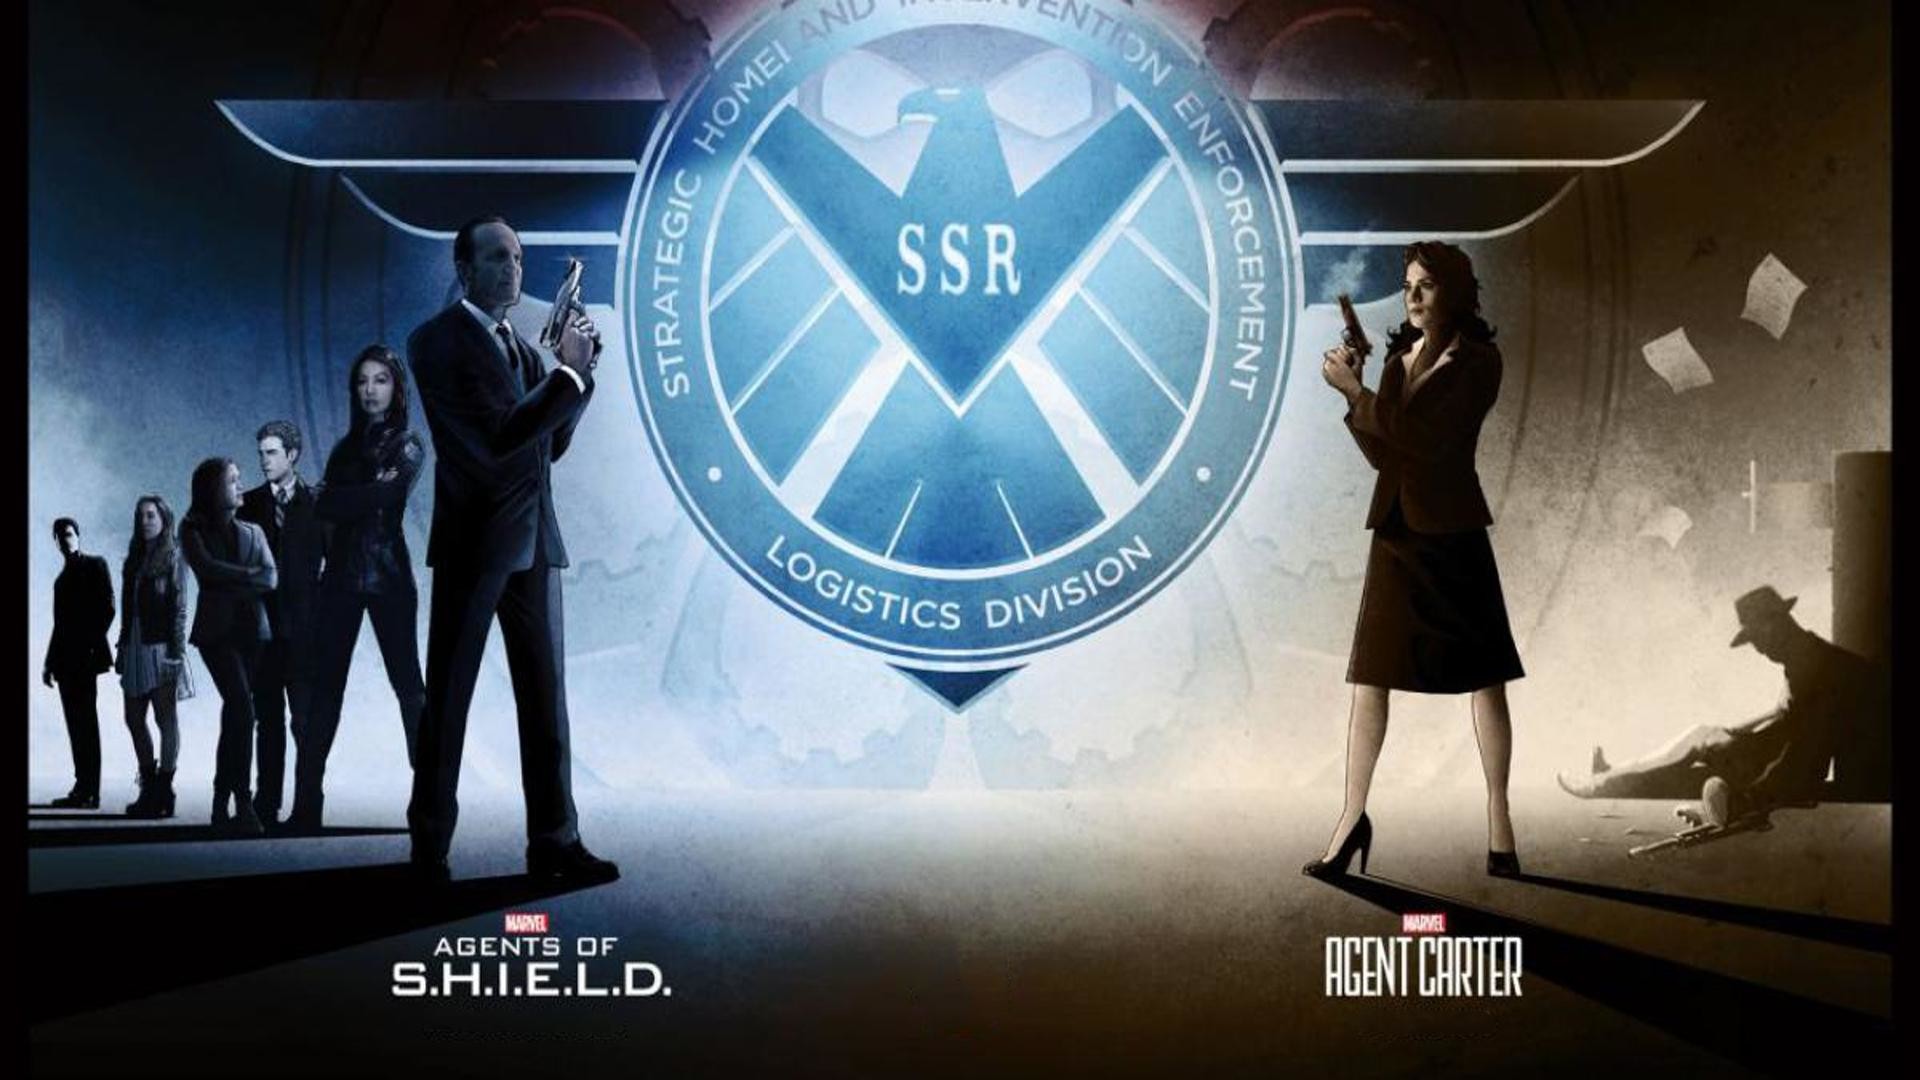 1920x1080 I found an image in one of the news pieces about Agents of S.H.I.E.L.D and  Agent Carter getting renewed and decided to make it a wallpaper.